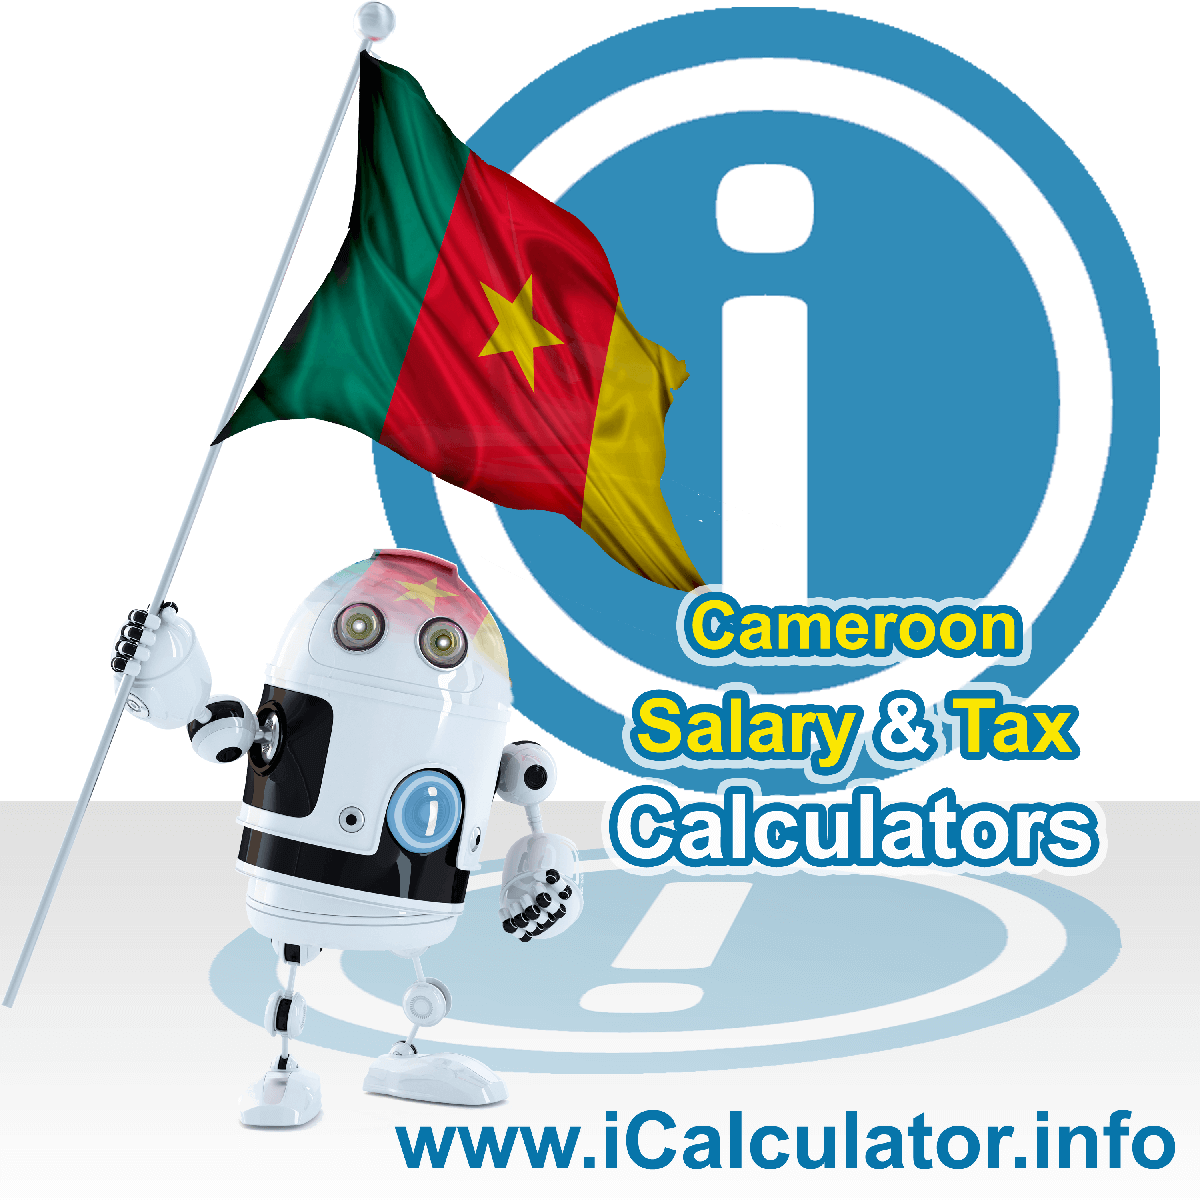 Cameroon Wage Calculator. This image shows the Cameroon flag and information relating to the tax formula for the Cameroon Tax Calculator